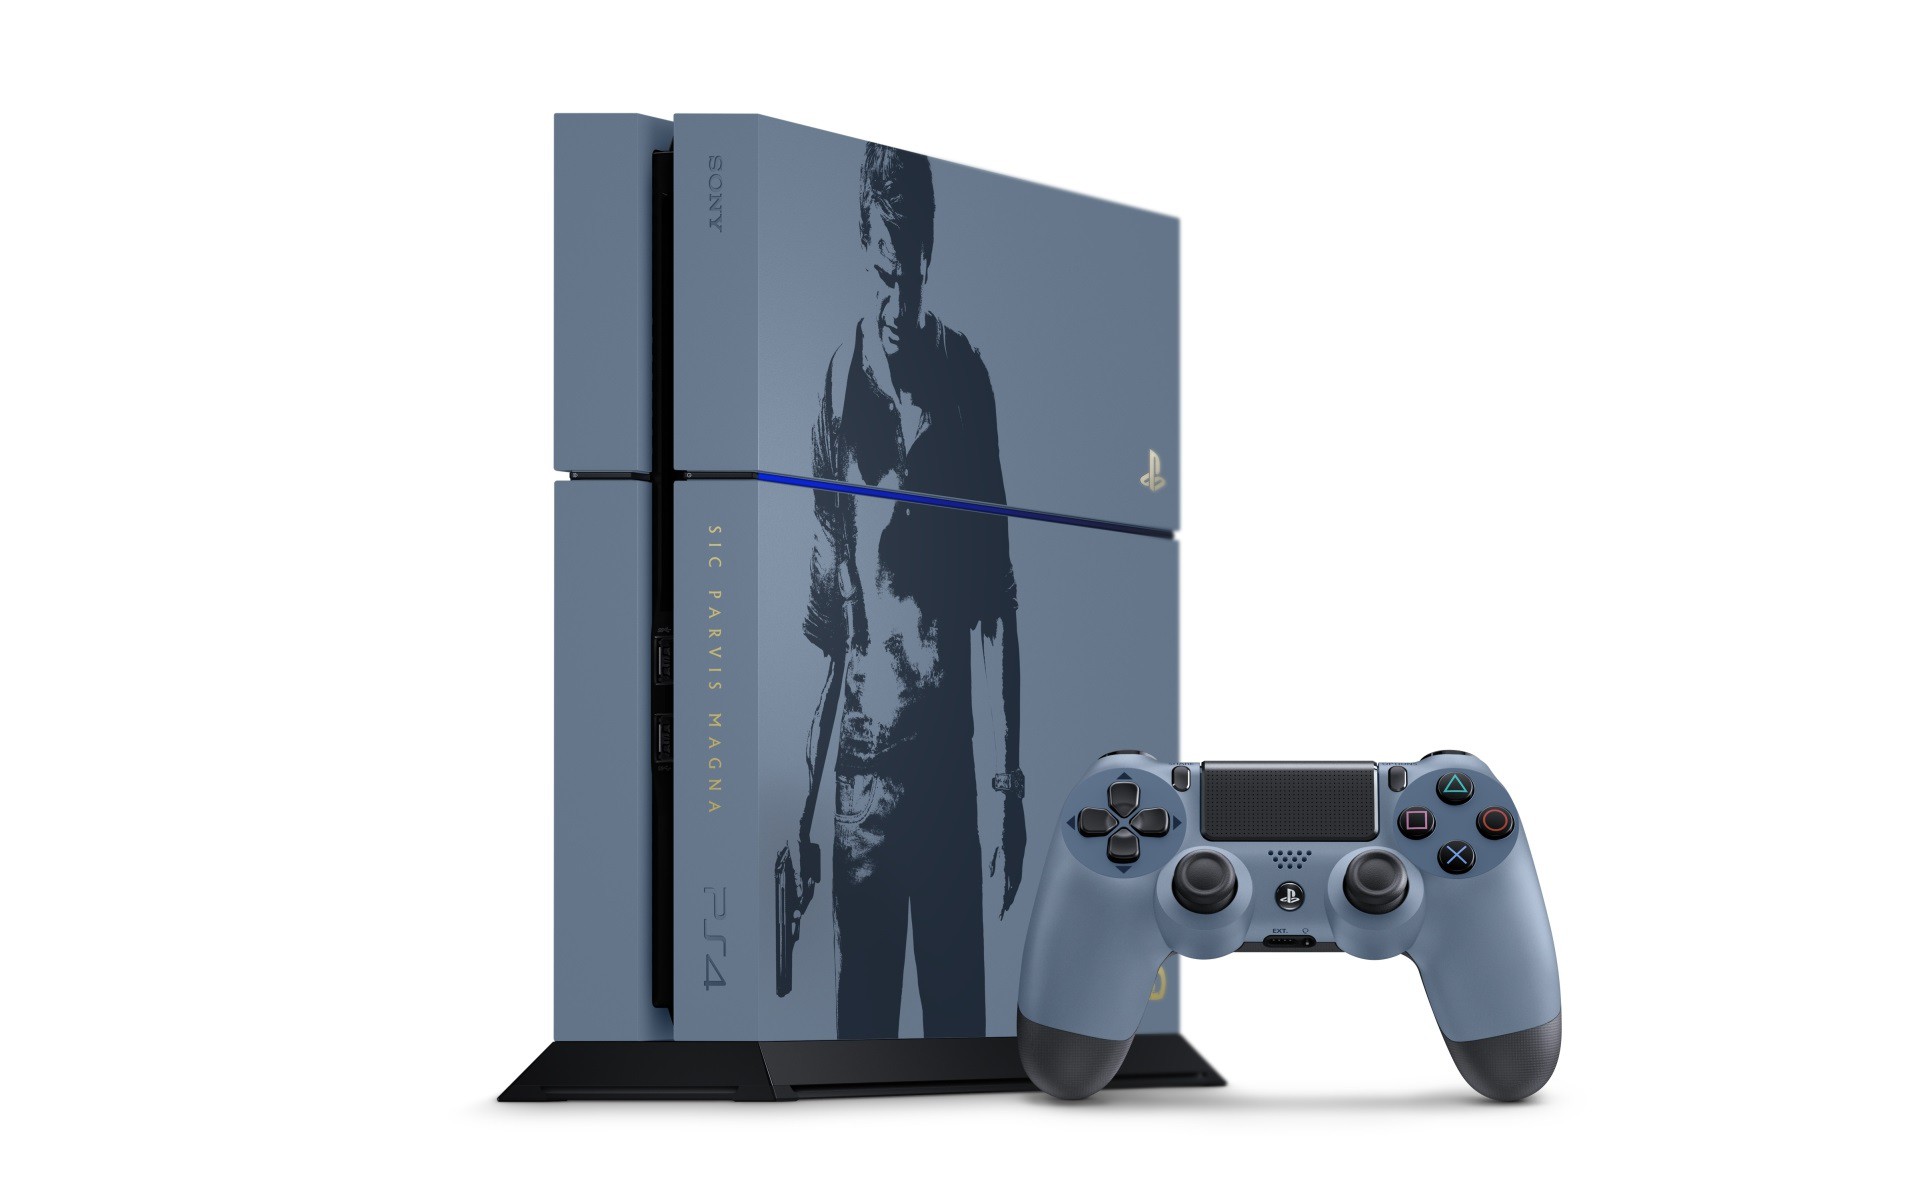 Ps4 общее. Ps4 Uncharted 4 Limited. Ps4 Uncharted 4 Limited Edition. Uncharted 4 ps4. PLAYSTATION 4 Uncharted Edition.